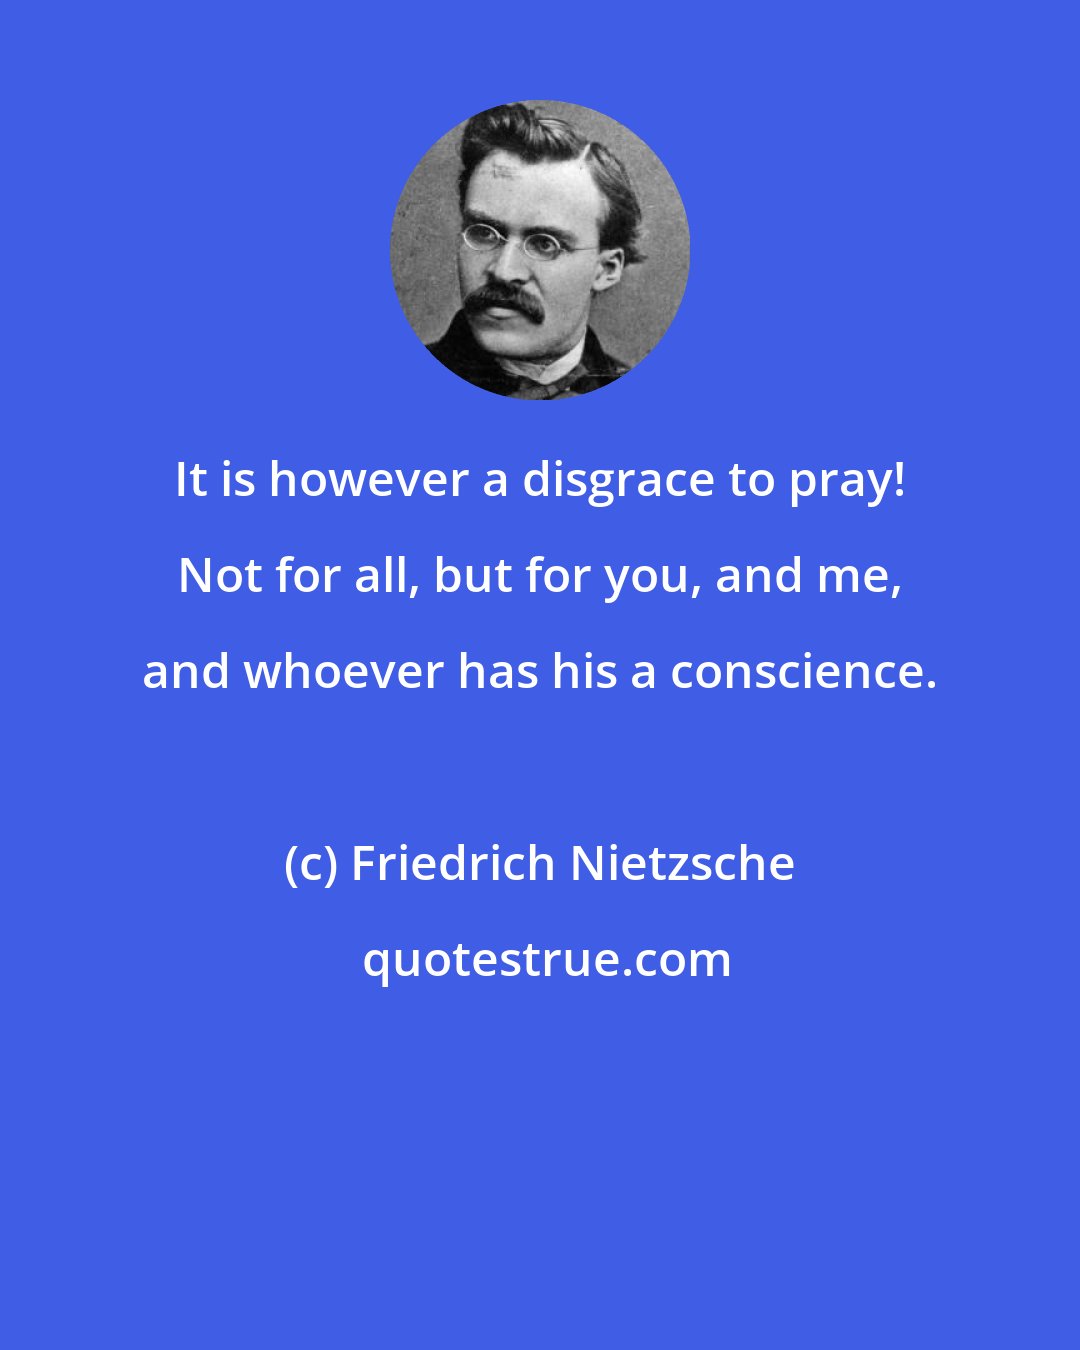 Friedrich Nietzsche: It is however a disgrace to pray! Not for all, but for you, and me, and whoever has his a conscience.